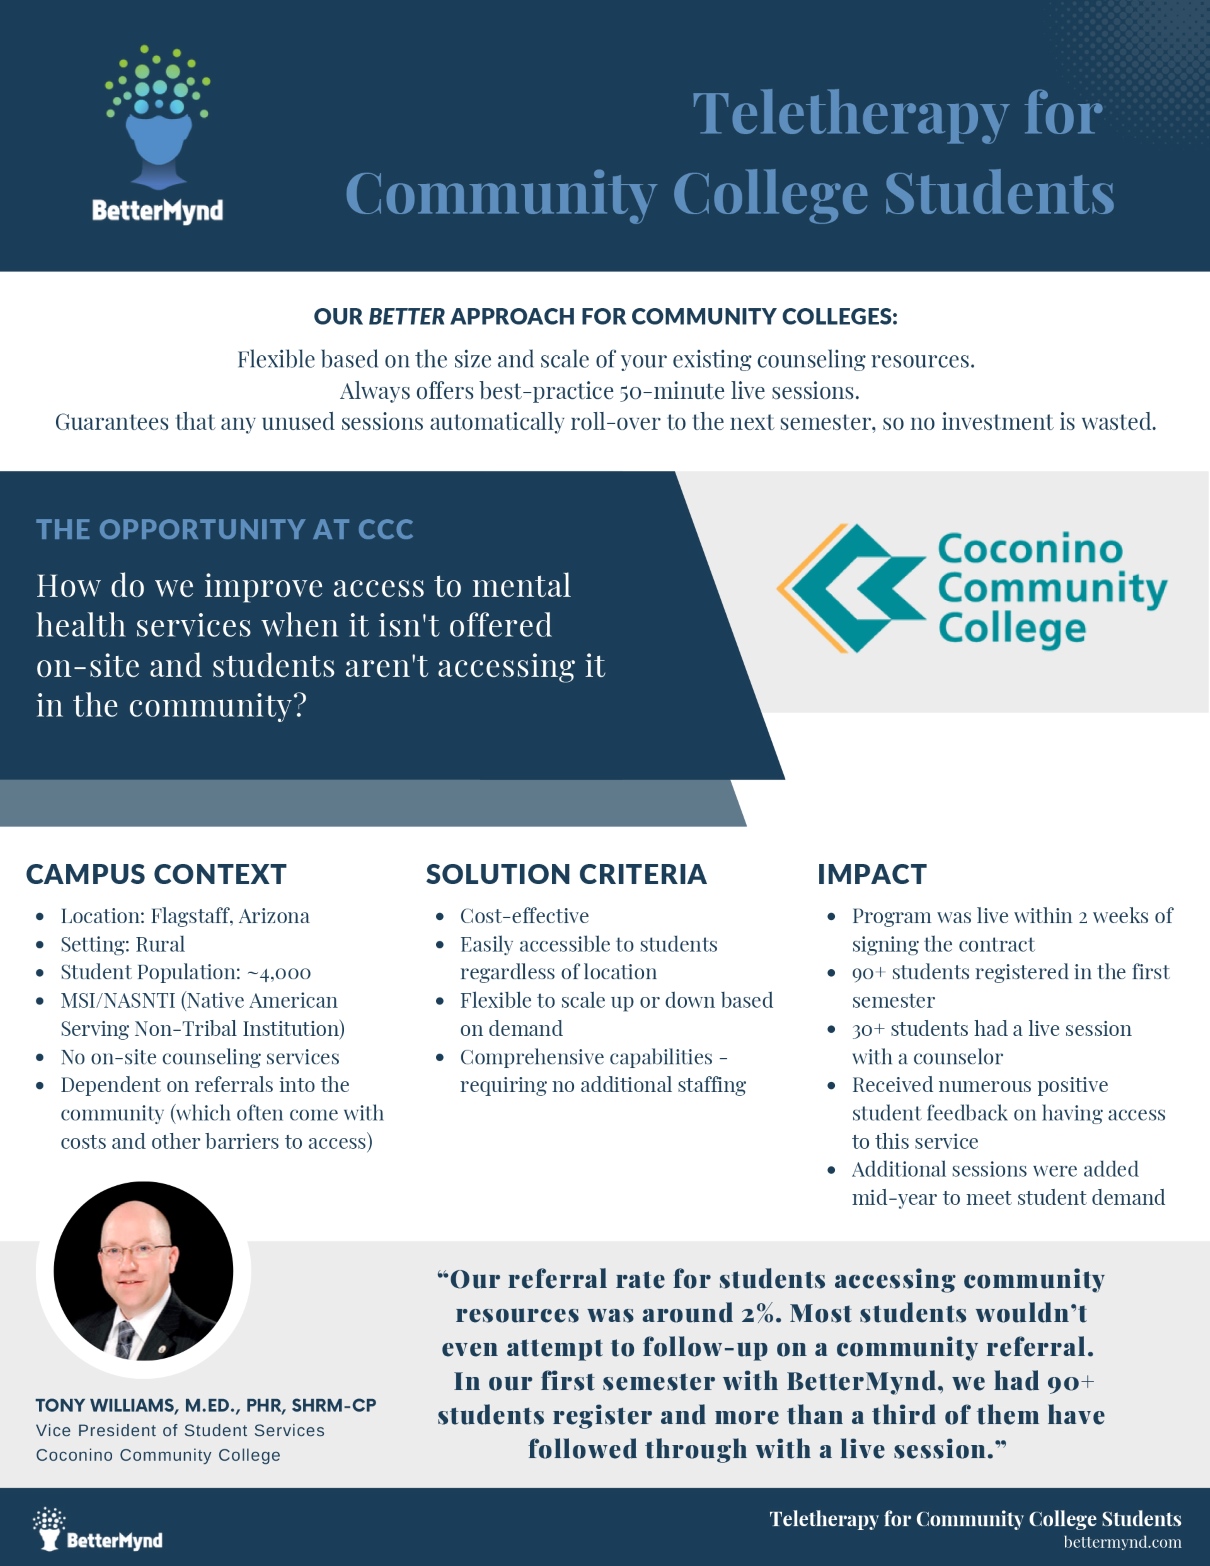 Teletherapy for Community College Students. The opportunity at Coconino Community College.